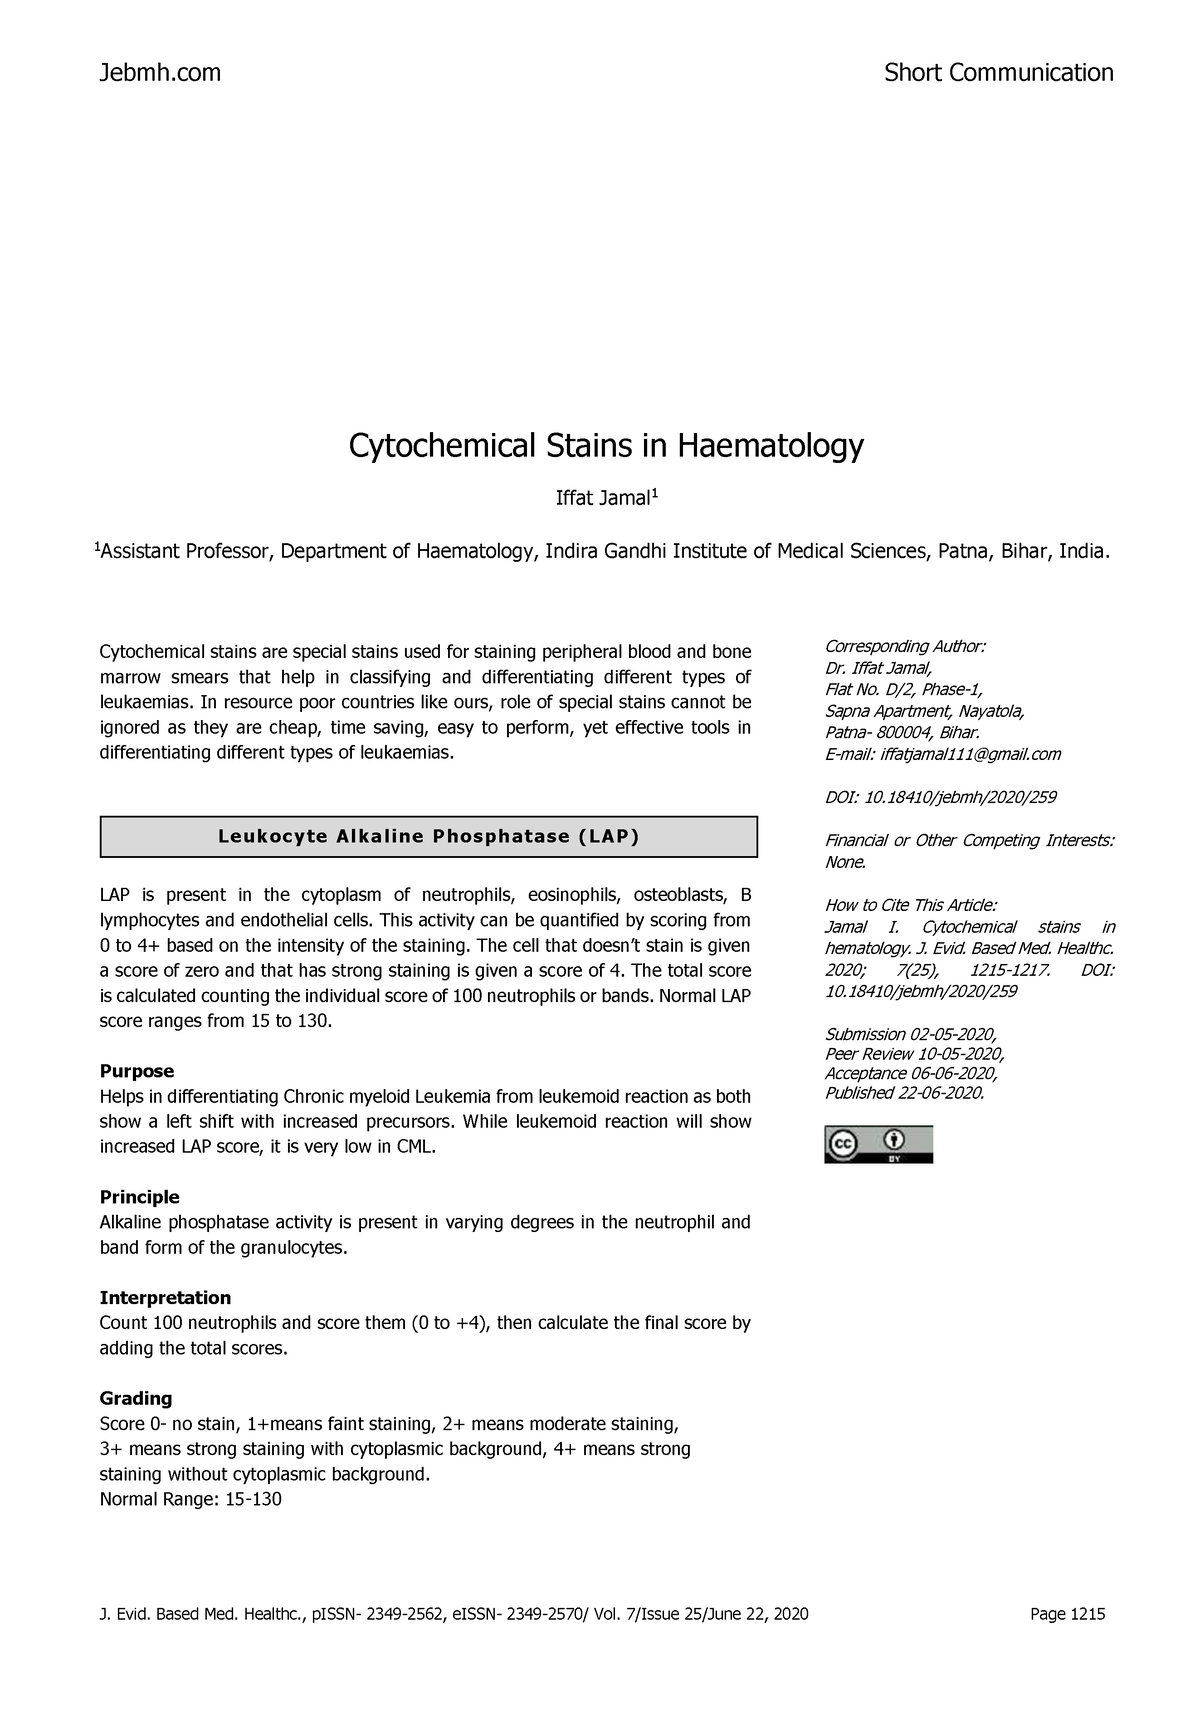 Cytochemical stains in haematology - Jebmh Short Communication J. Evid ...